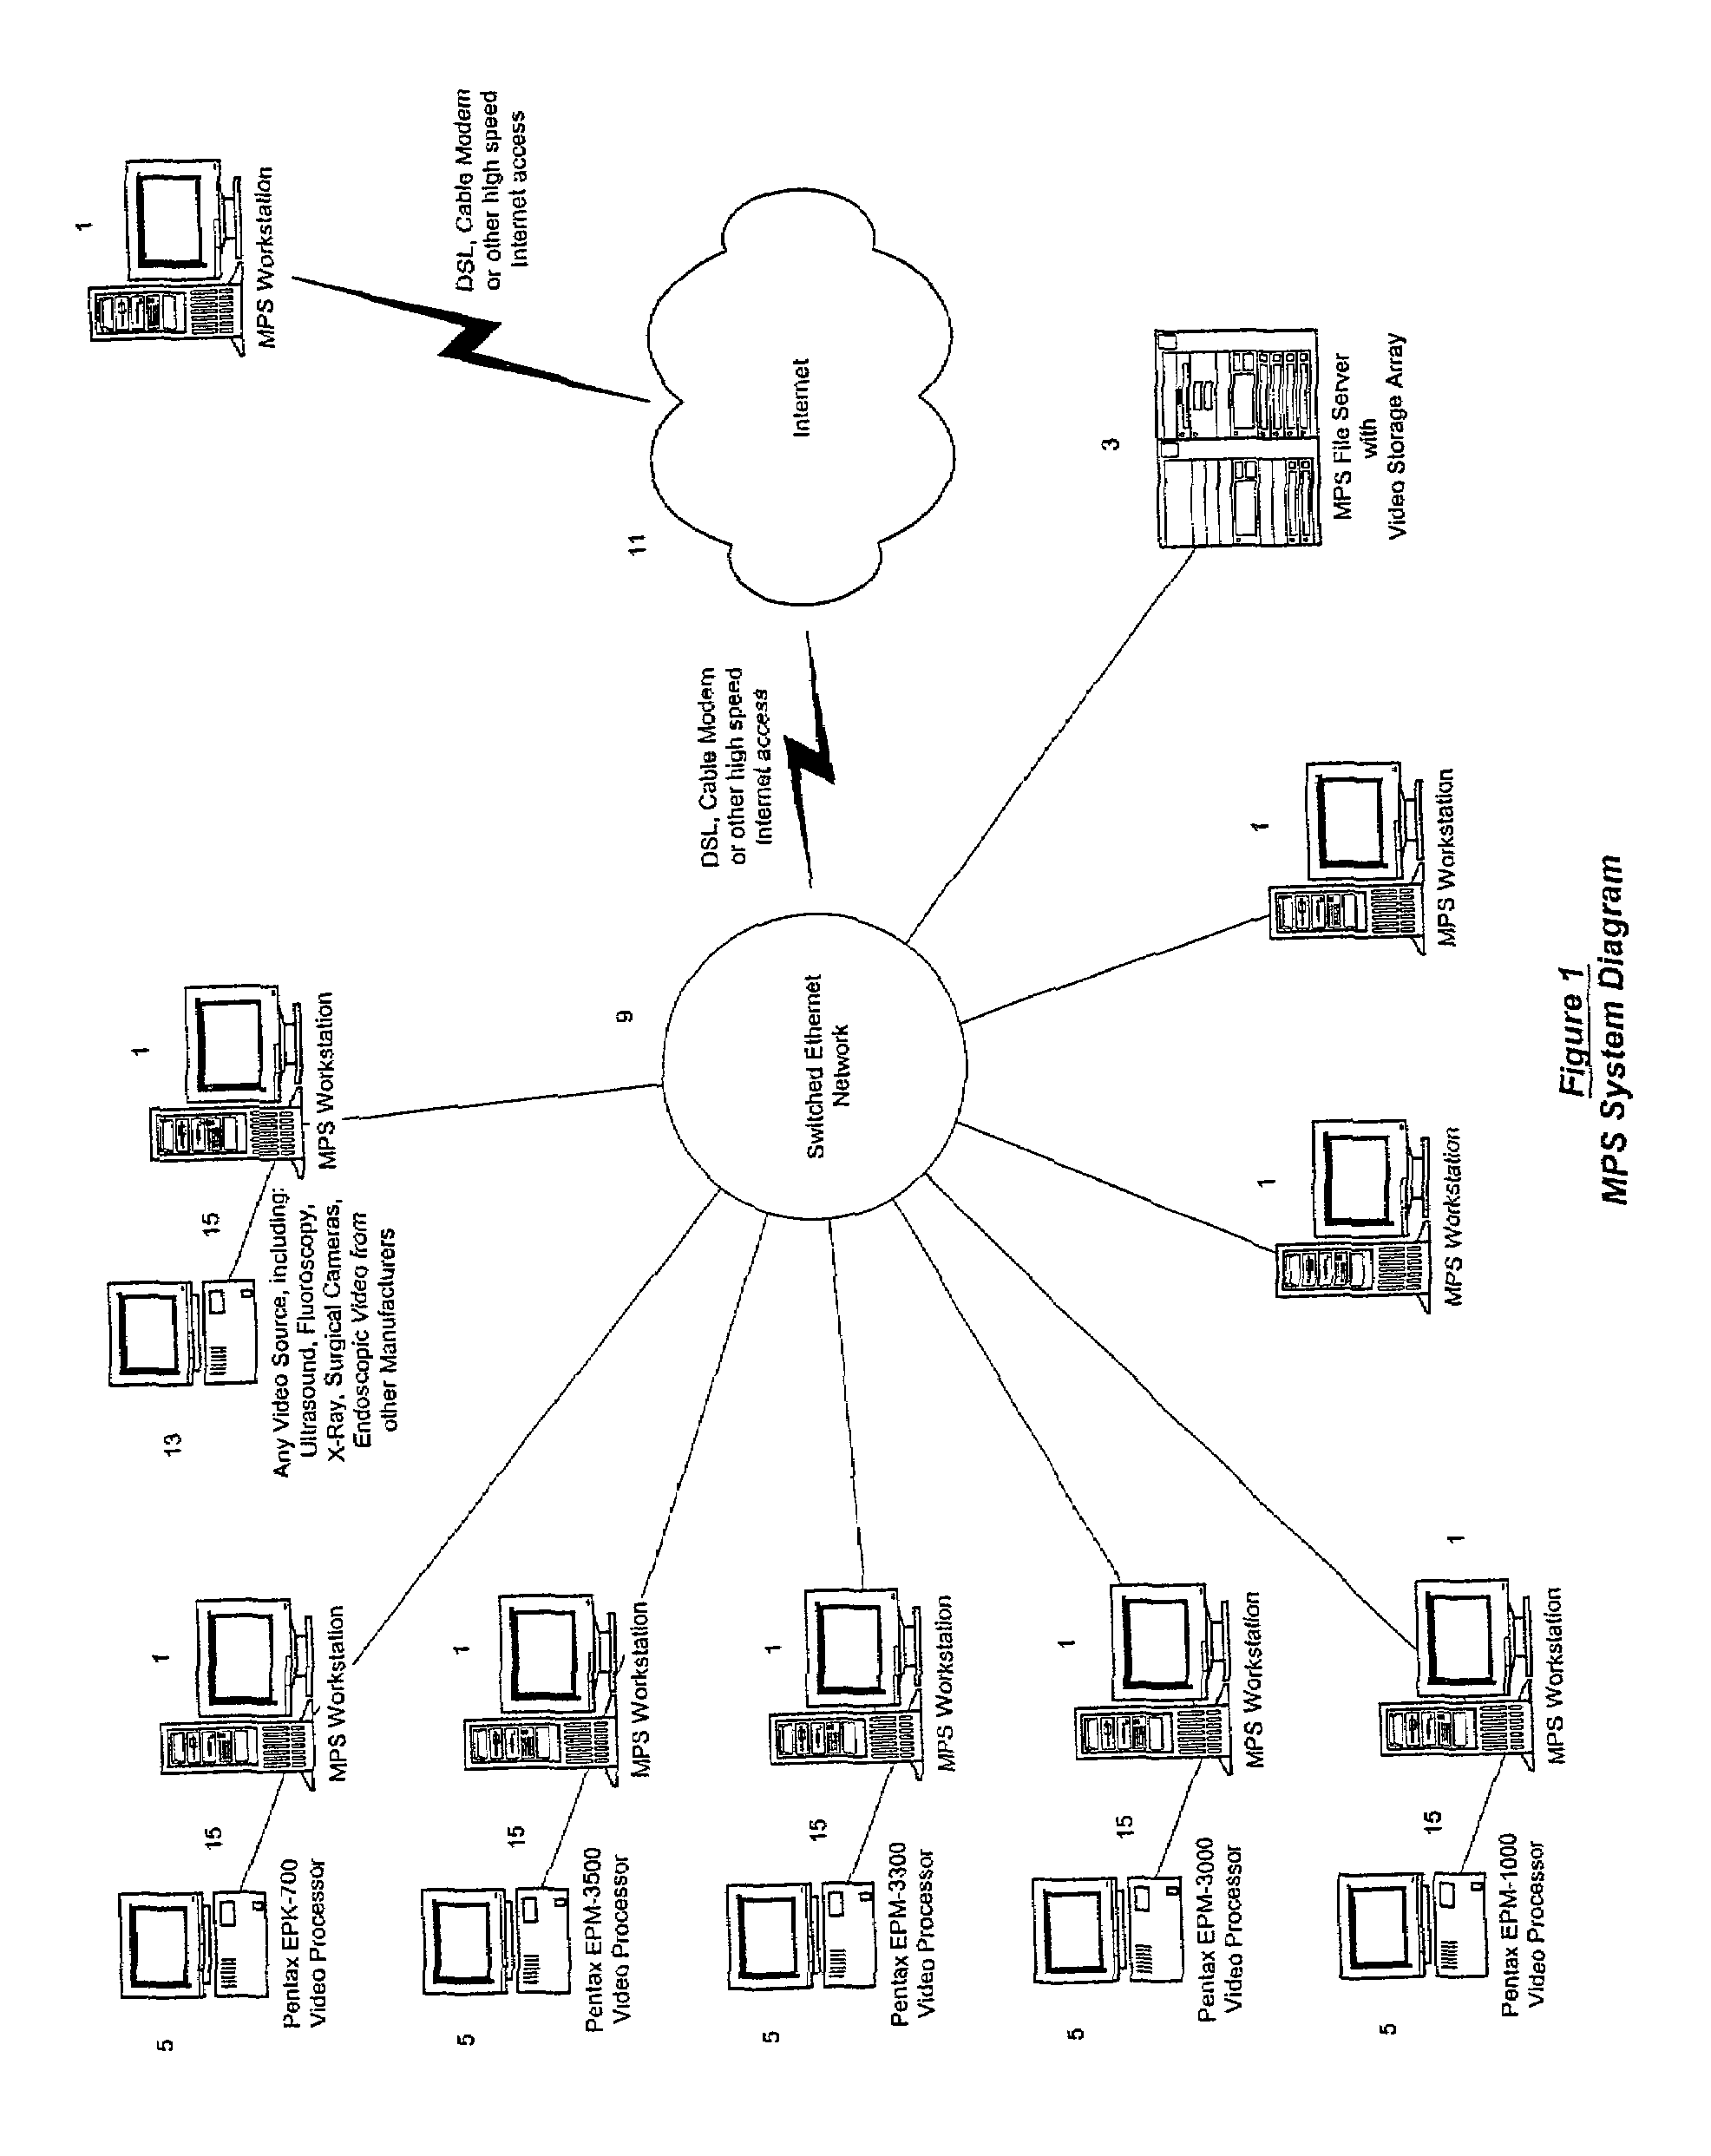 Computer-based video recording and management system for medical diagnostic equipment